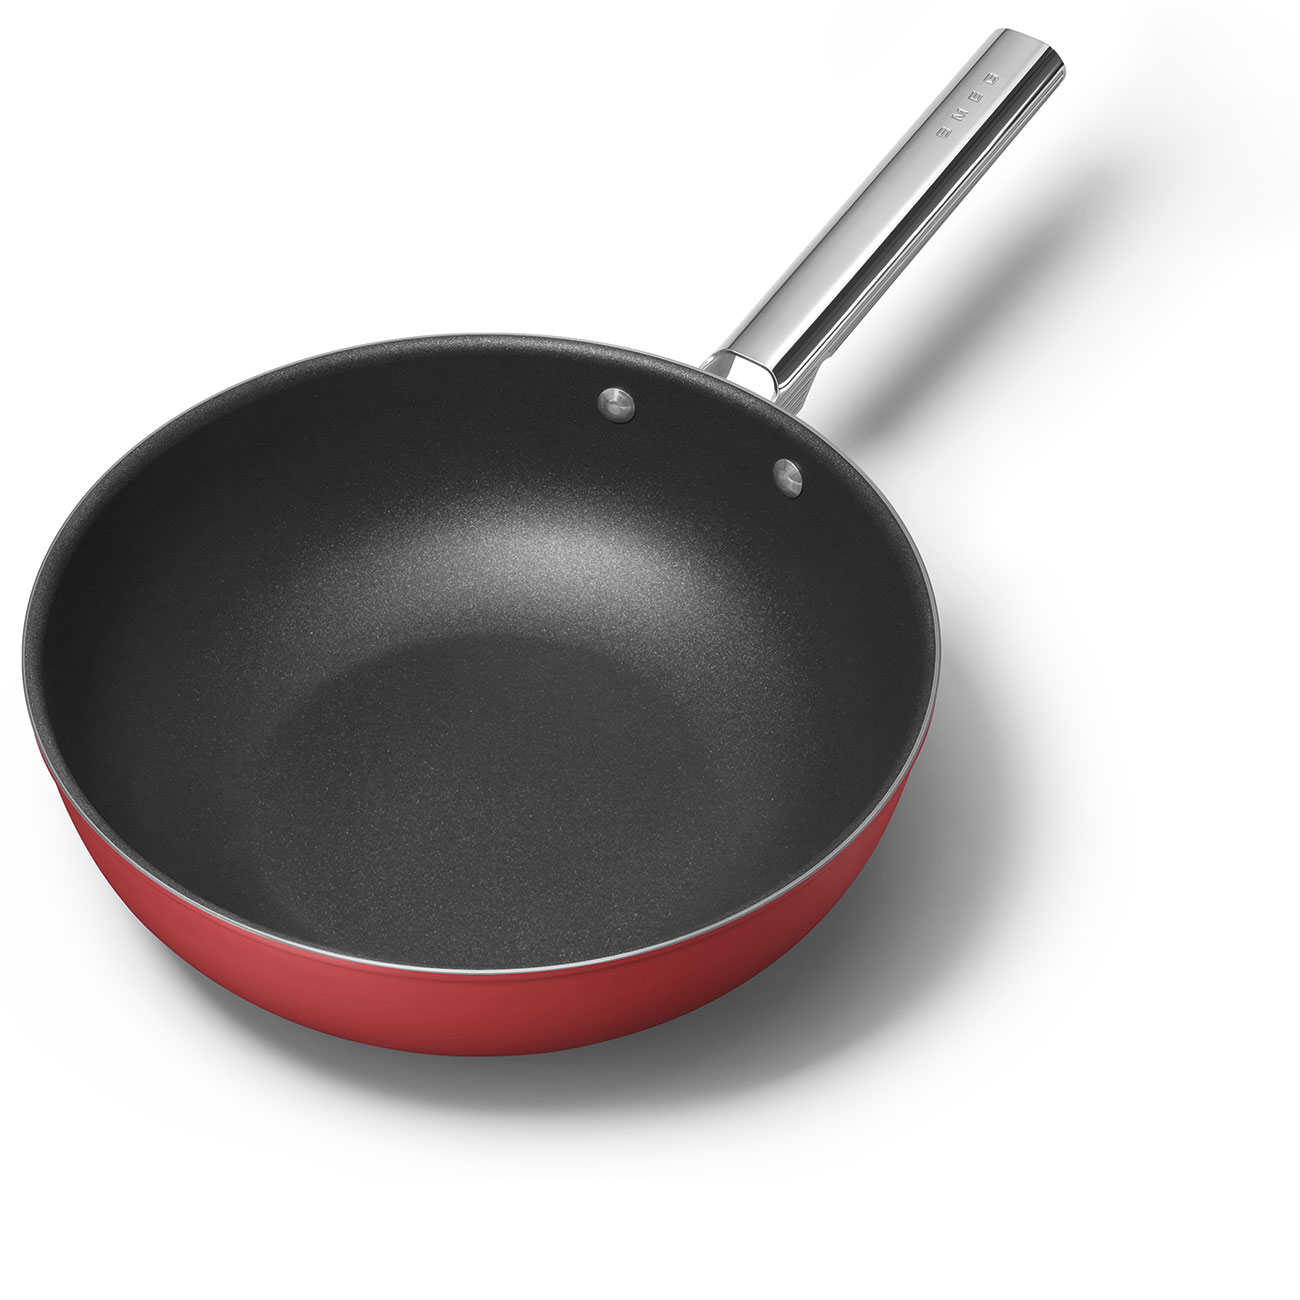 Smeg Red Non-stick Wok with Stainless Steel Handle - CKFW3001RDM_3